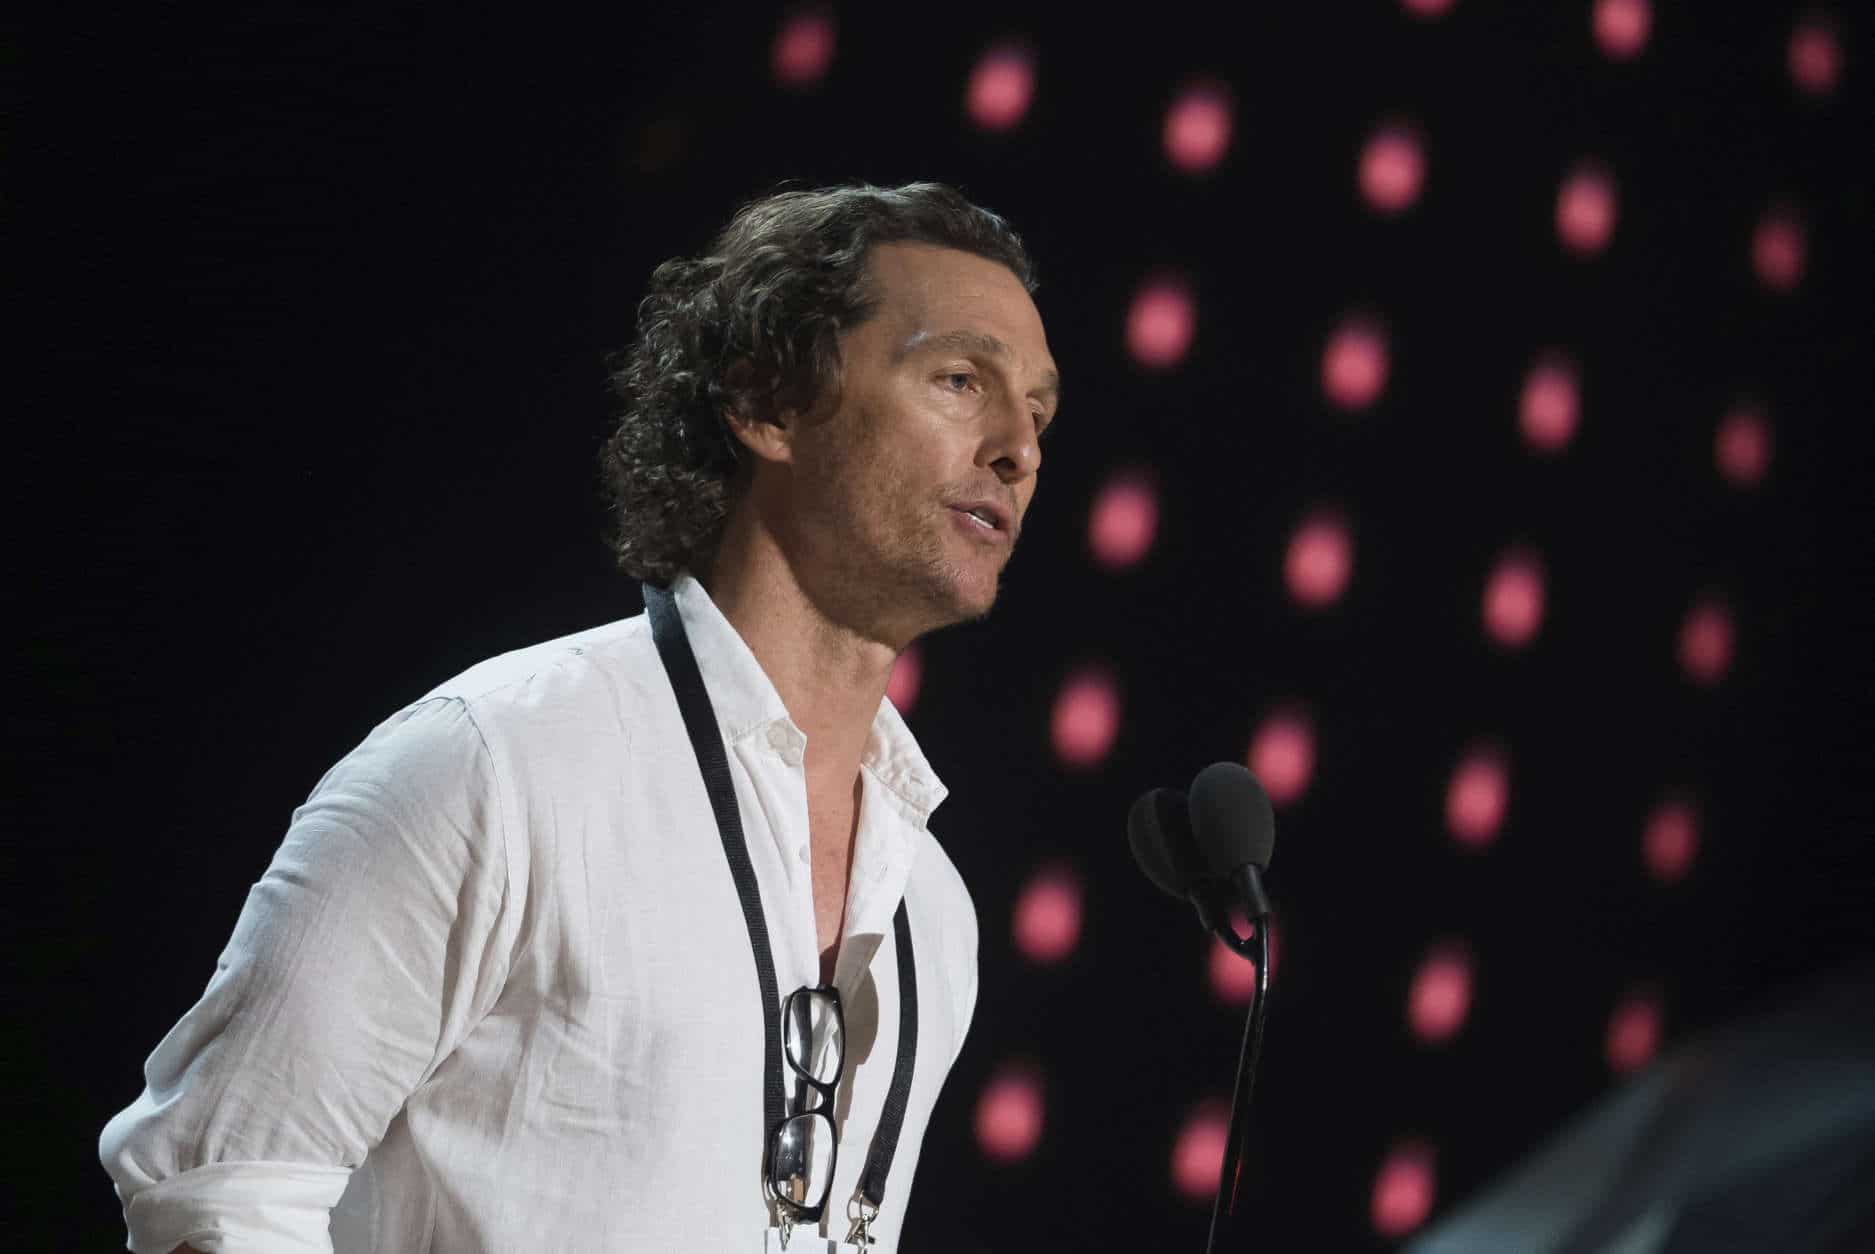 Matthew McConaughey appears during rehearsals for the 90th Academy Awards in Los Angeles on Saturday, March 3, 2018. The Academy Awards will be held at the Dolby Theatre on Sunday, March 4. (Photo by Charles Sykes/Invision/AP)